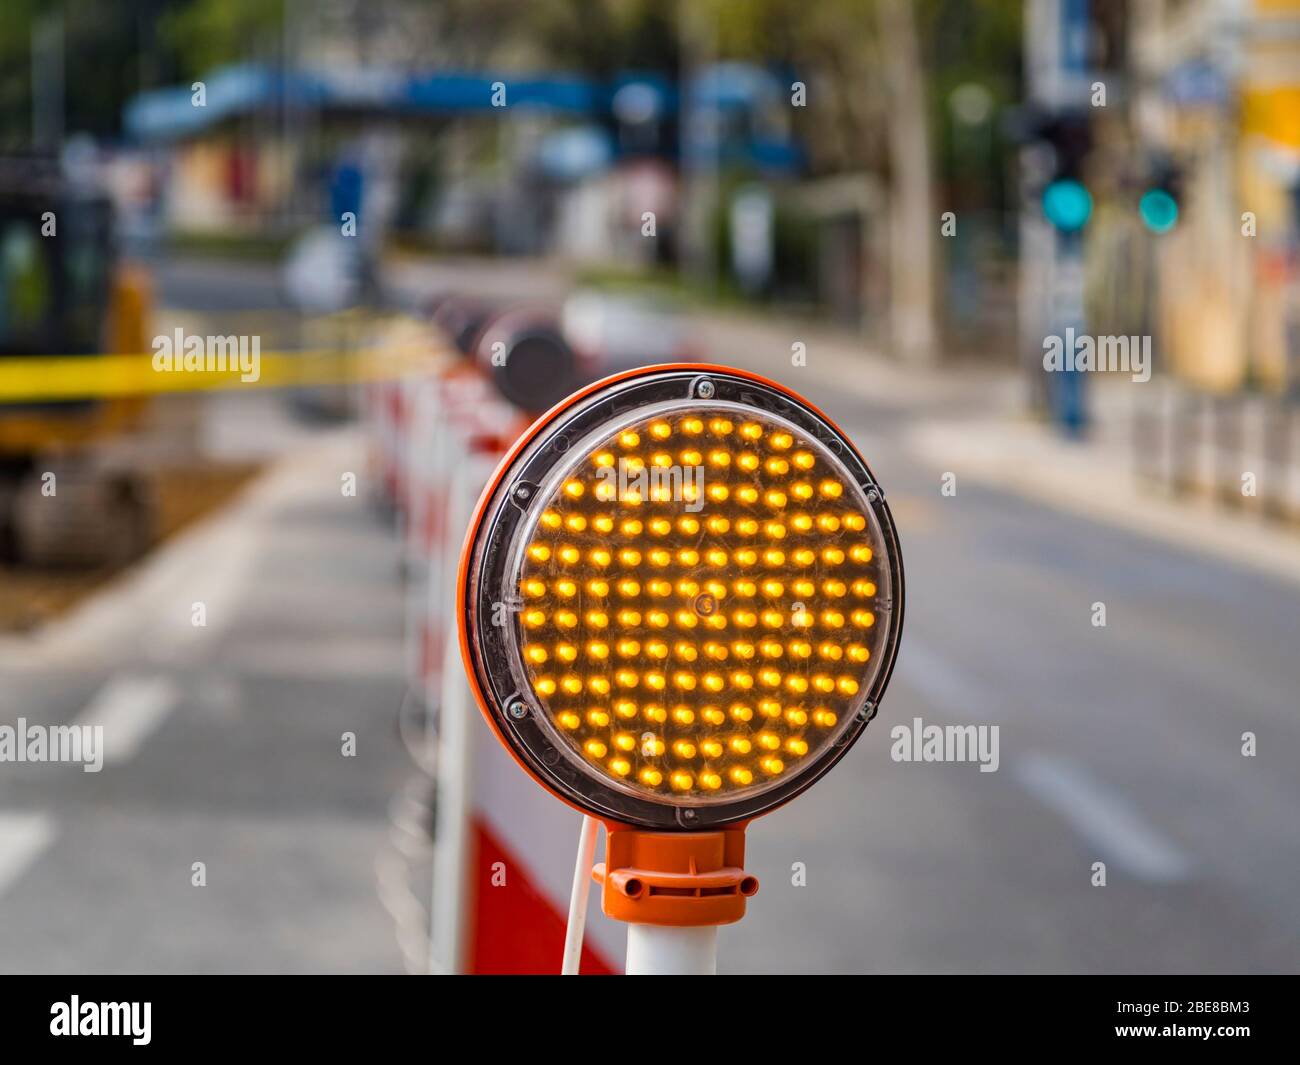 Road multiple Yellow LED lamps circular signal slow traffic warning sign work in progrss Stock Photo